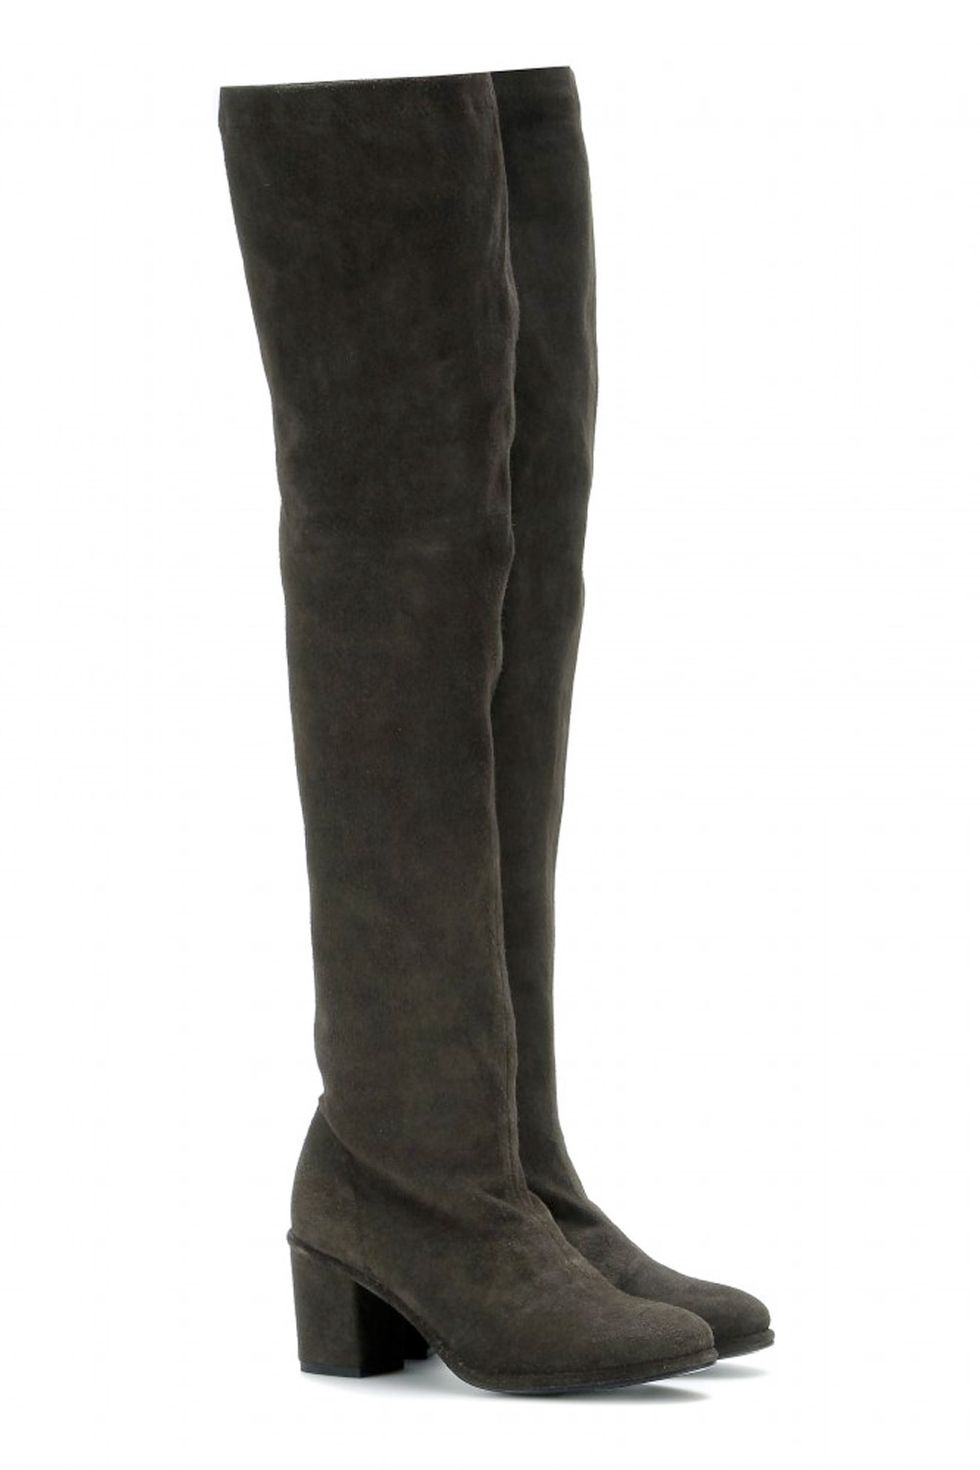 Boot, Costume accessory, Knee-high boot, Riding boot, Leather, 